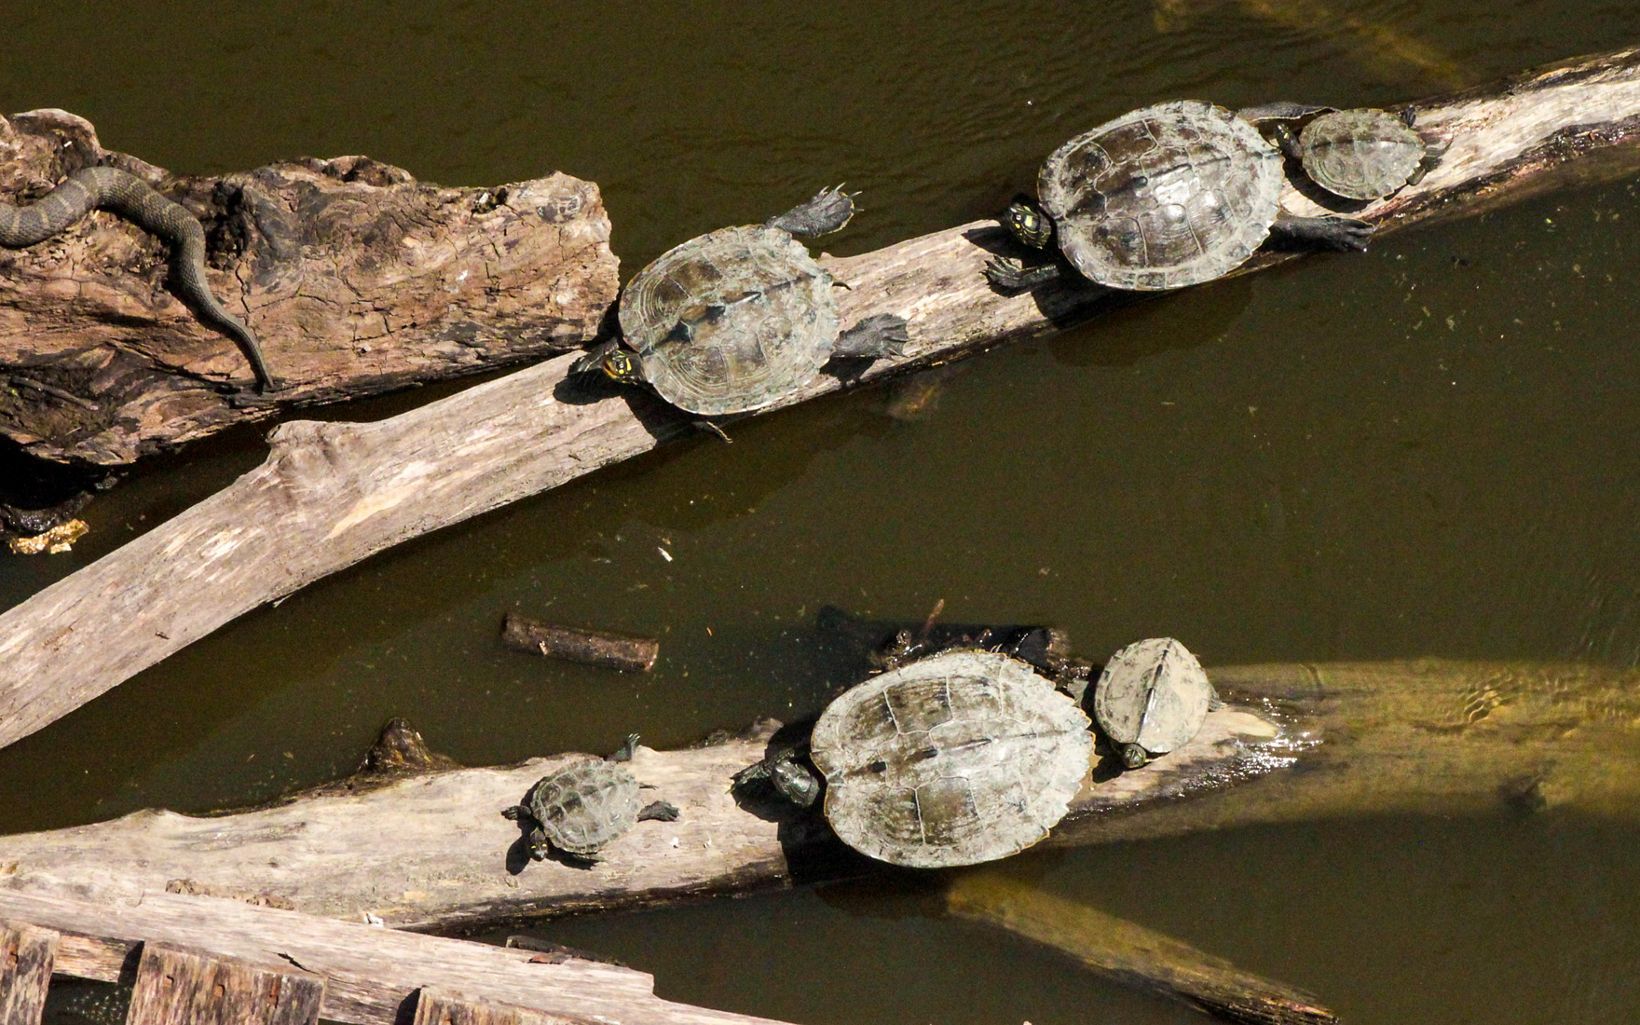 Turtles in The Land of the Swamp White Oak basking in the sun on a log